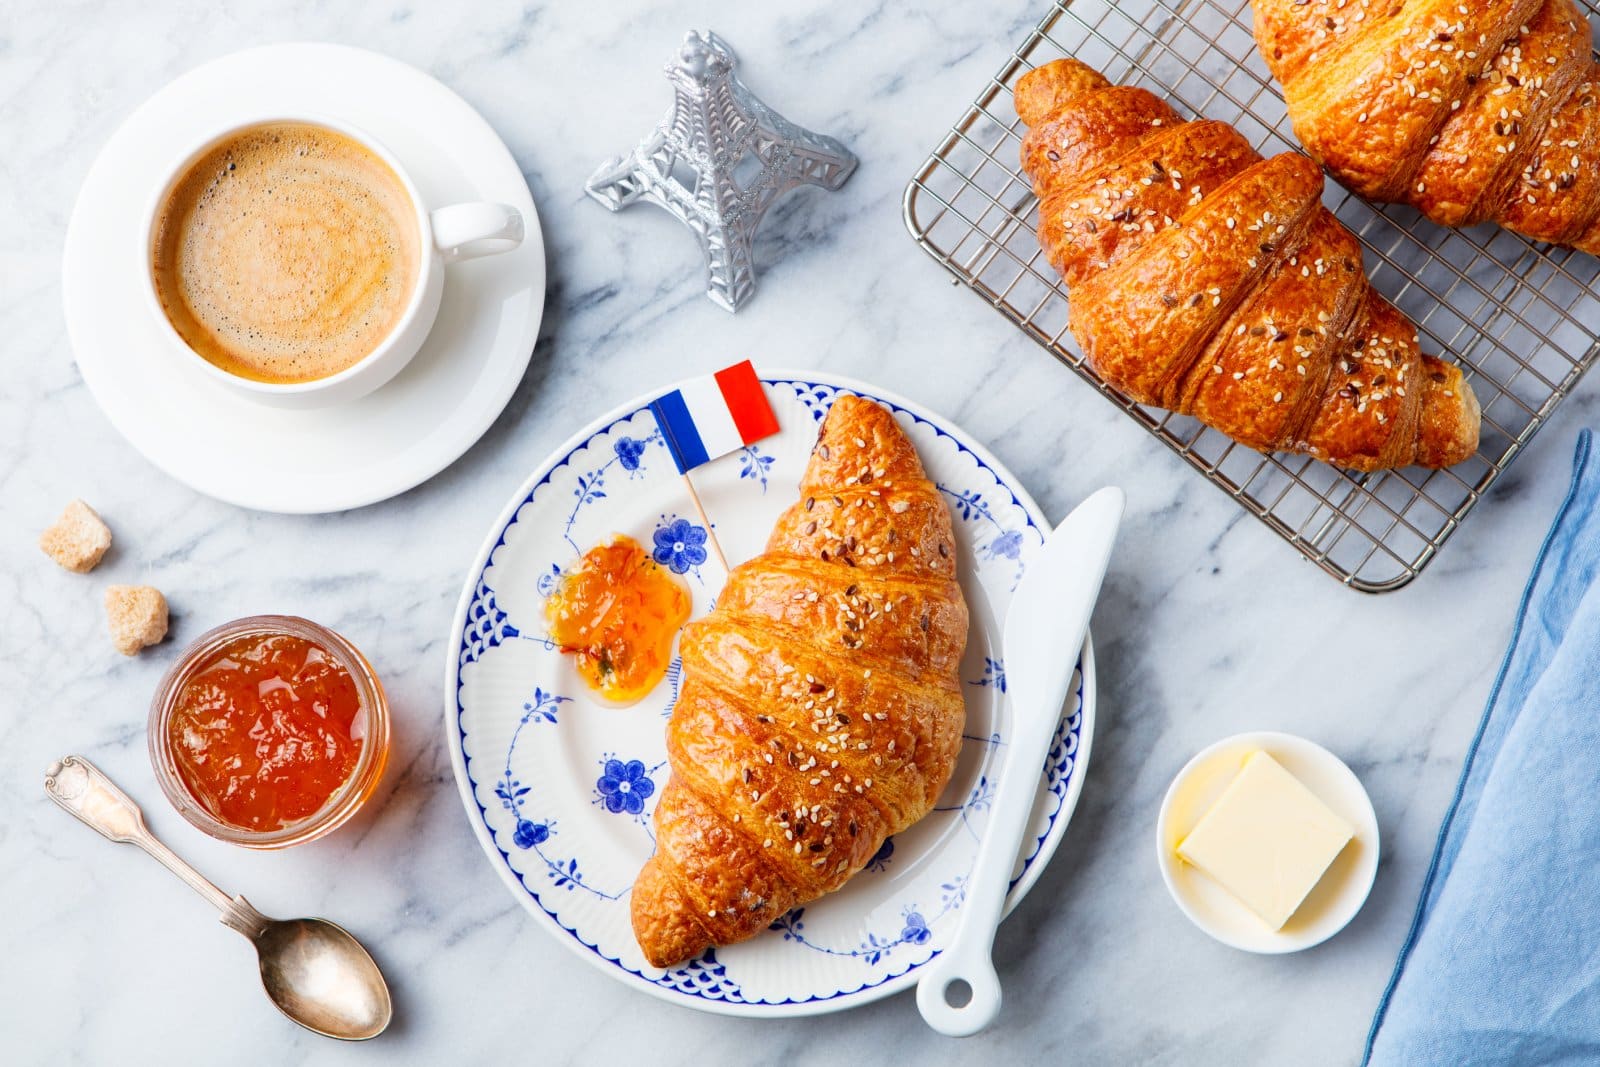 Image Credit: Shutterstock / Anna_Pustynnikova <p><span>Italians typically enjoy a light breakfast, often consisting of coffee and a pastry, such as a cornetto (similar to a croissant) or biscotti dipped in coffee. Breakfast is usually quick and simple, as Italians prefer to savor their morning coffee at a local café while catching up with friends or reading the newspaper.</span></p>